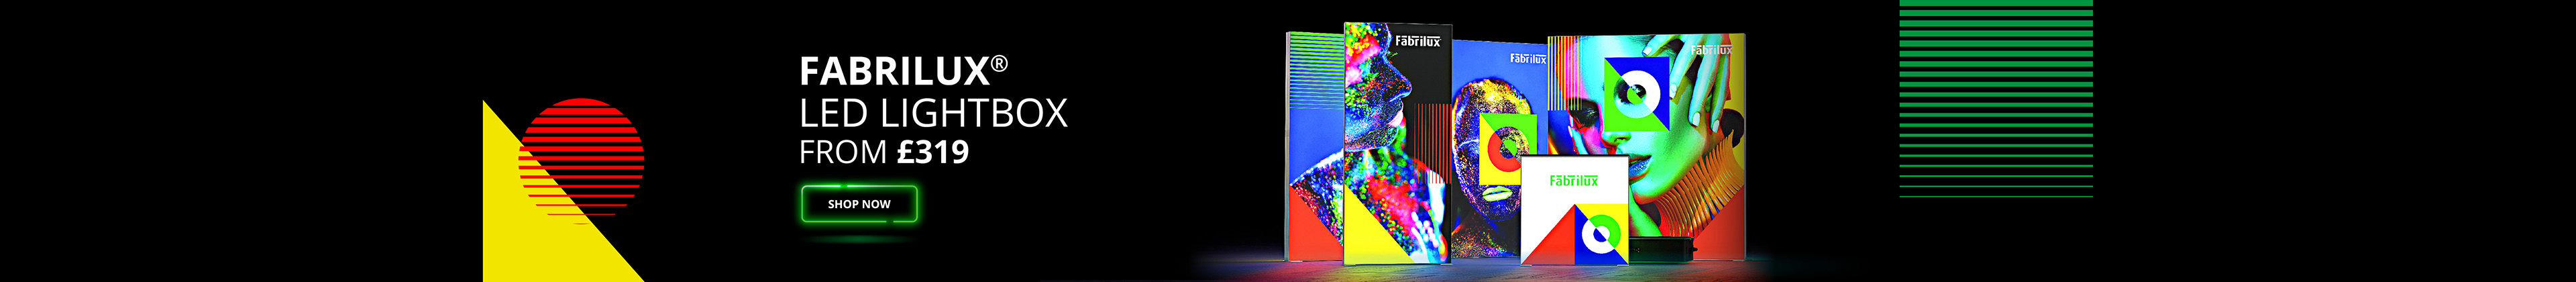 FABRILUX LED Lightbox Pop Up Stands